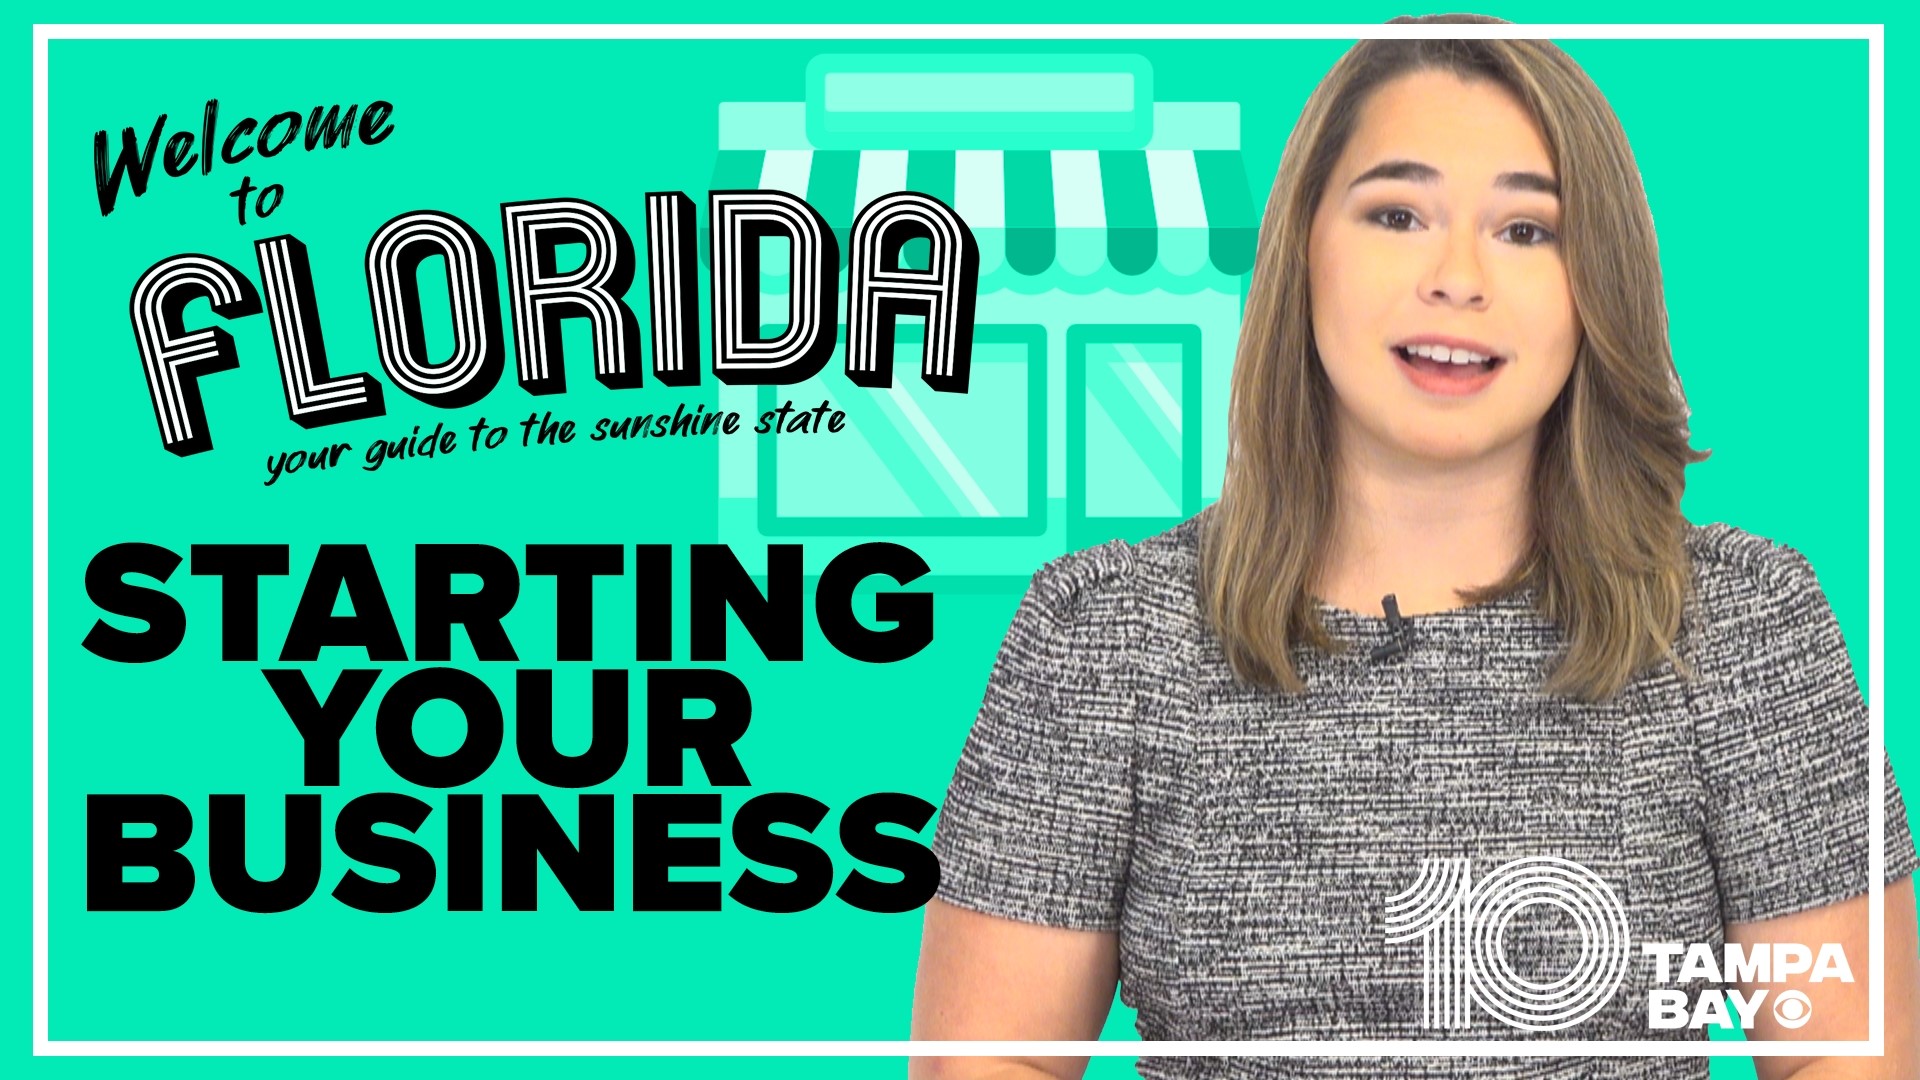 If you are starting a business in Florida, there are a ton of benefits and incentives to help you get started.